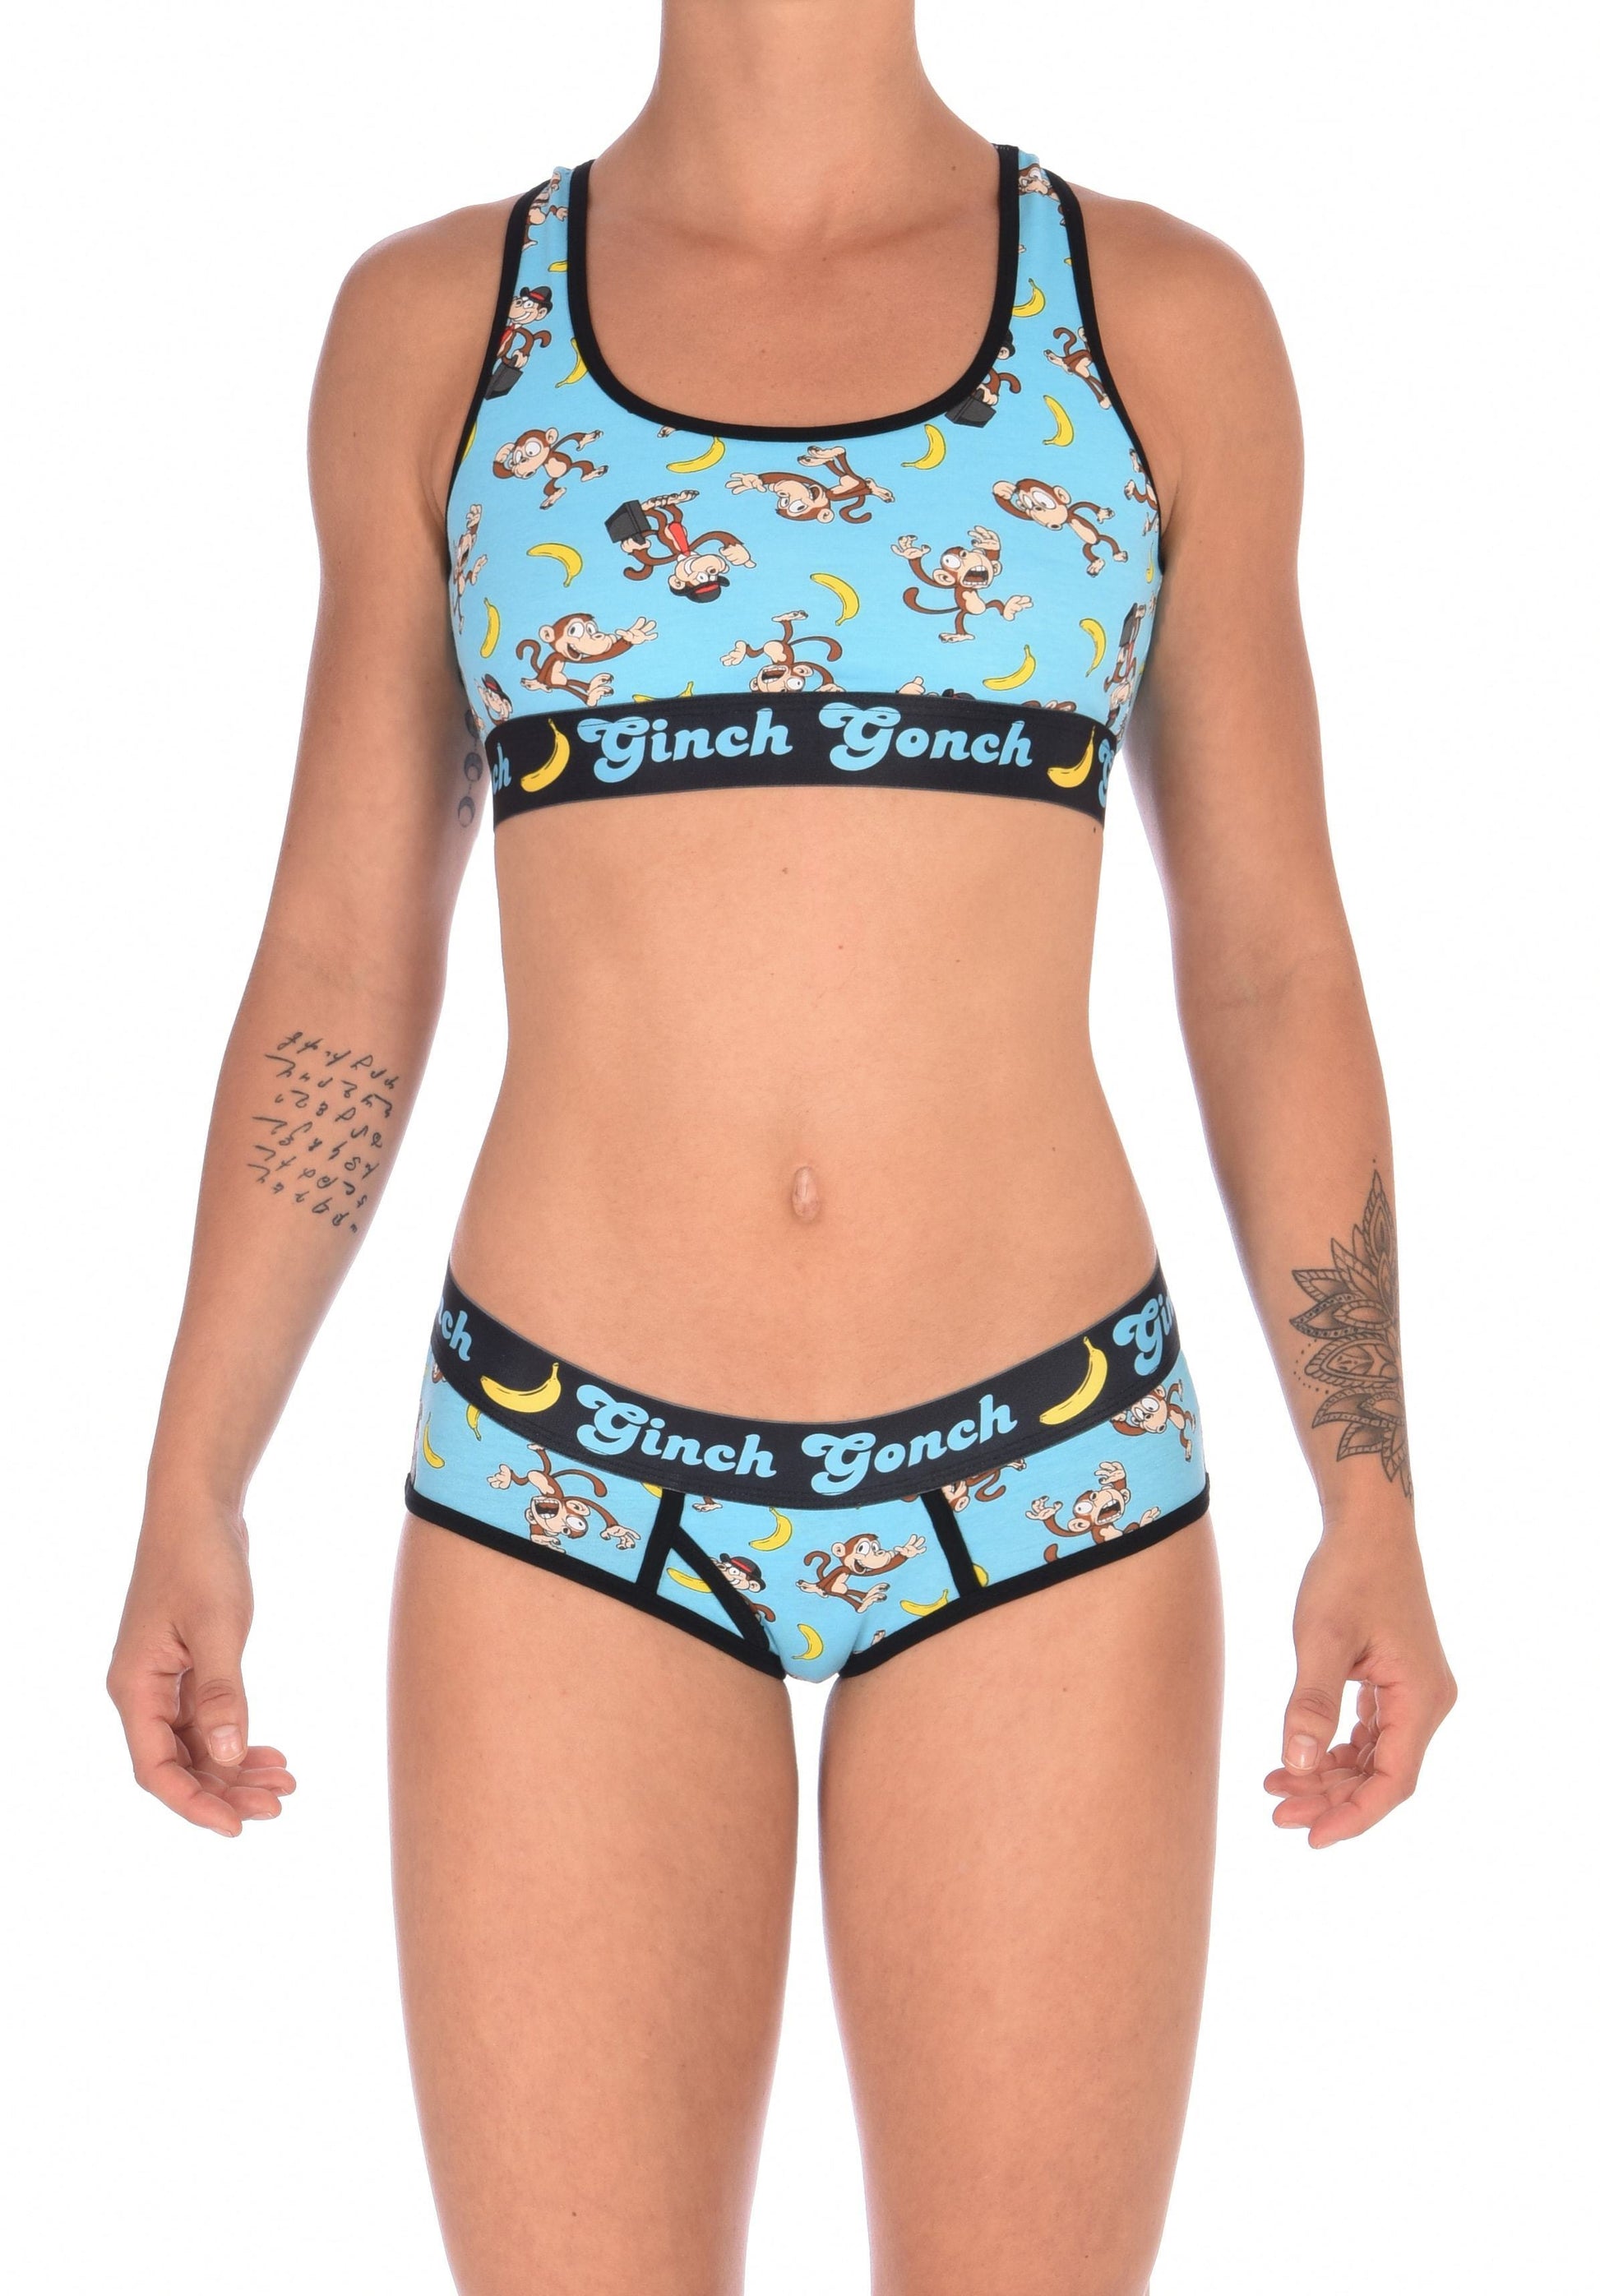 Ginch Gonch Monkey Business Women's Underwear boy cut brief with y front, with blue background, monkeys, and bananas. Black trim and printed waistband with Ginch Gonch and bananas. Front. Matching Sports bra